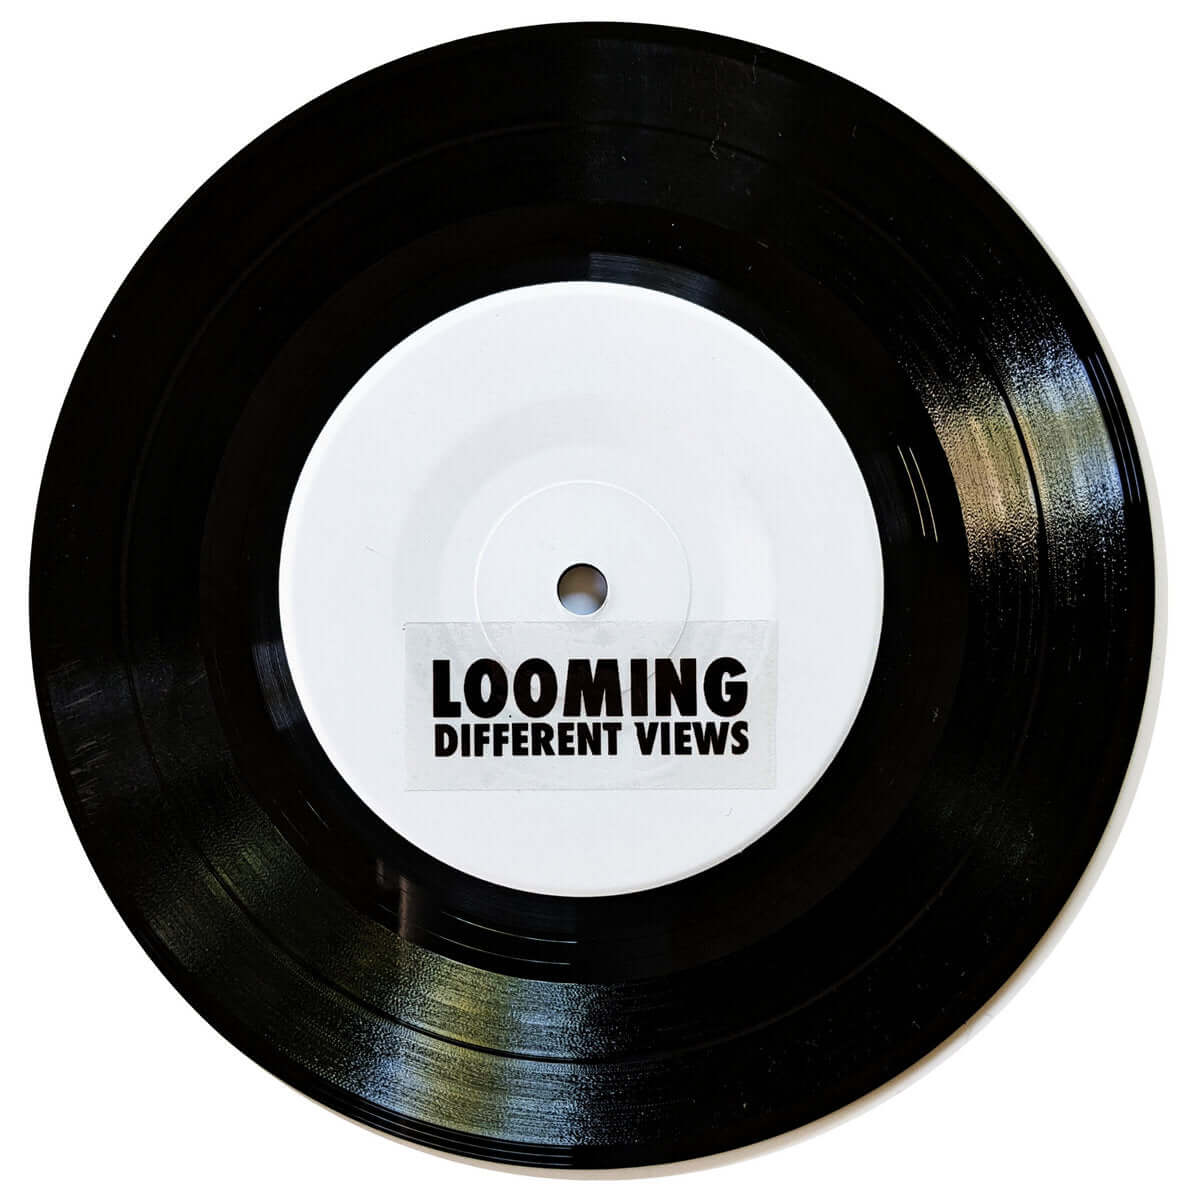 Looming - Different Views - Limited Edition 7 Inch Vinyl Test Pressing - Cold Busted